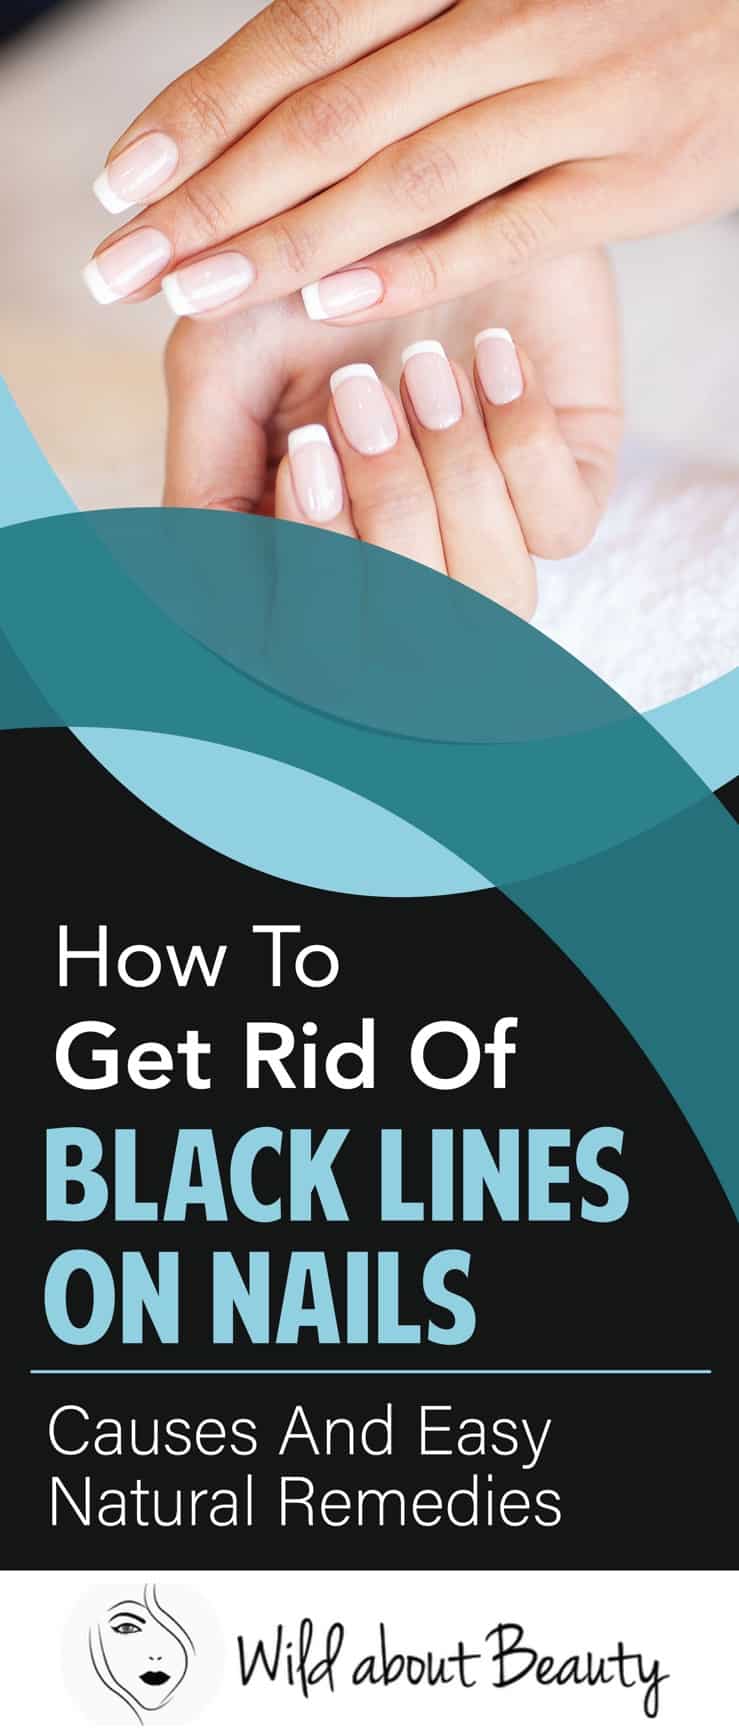 How to Get Rid of Black Lines on Nails – Causes and Easy Natural Remedies